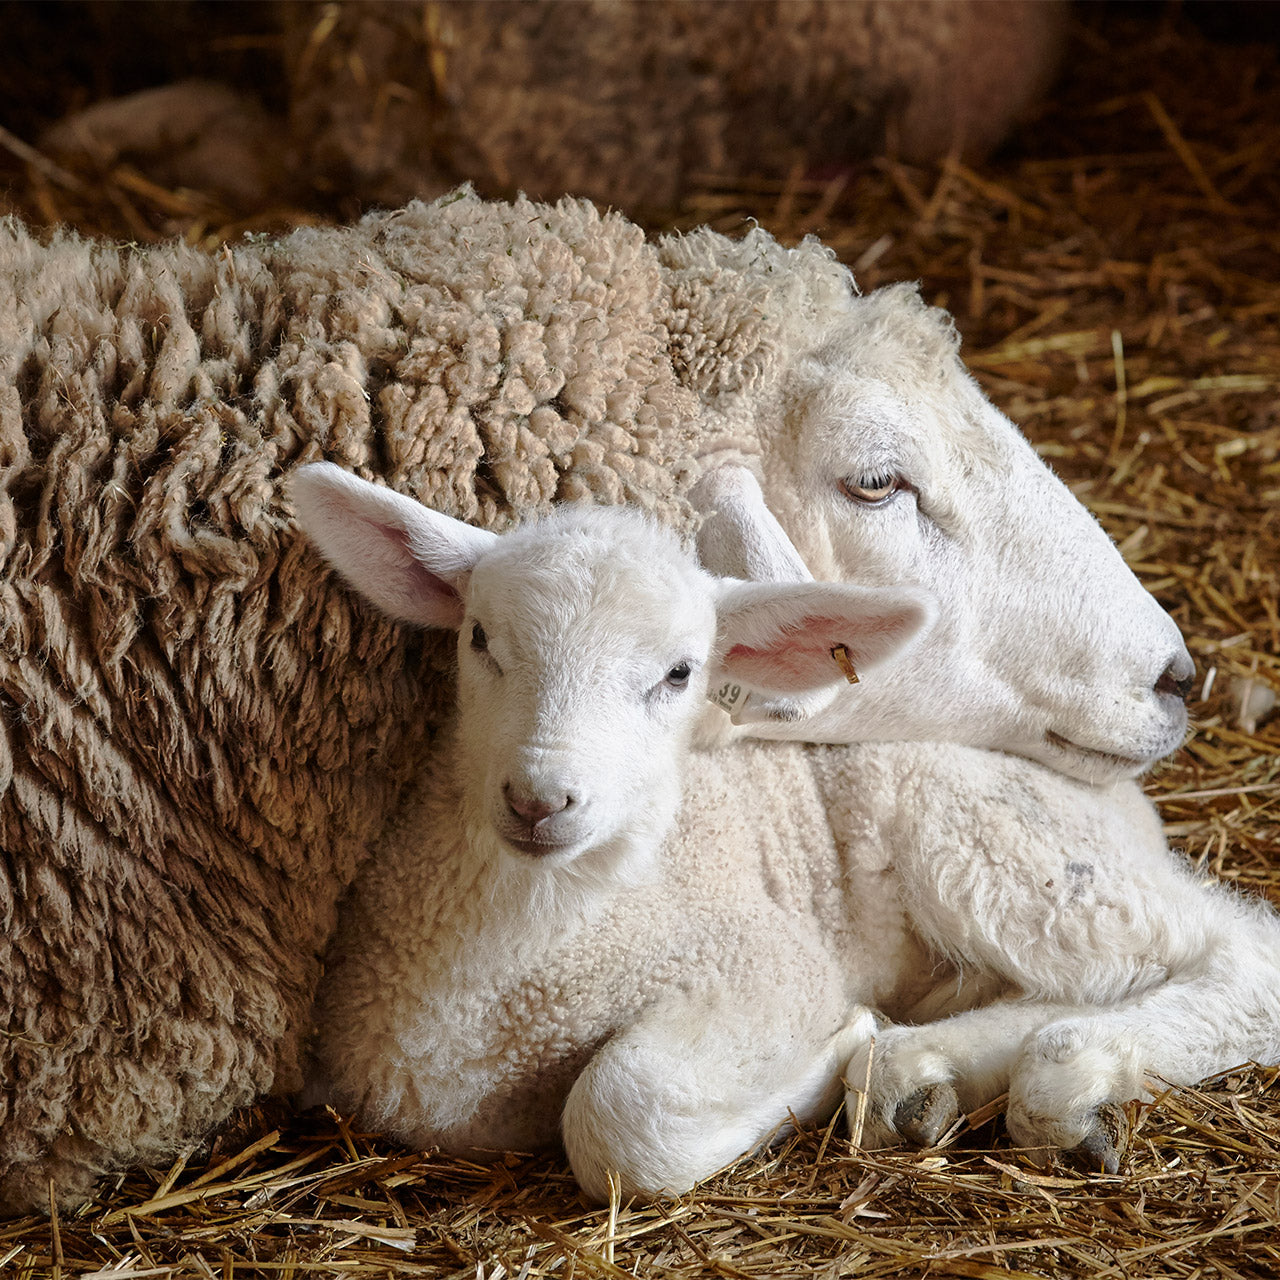 How to provide your lamb proper nutrition from the start